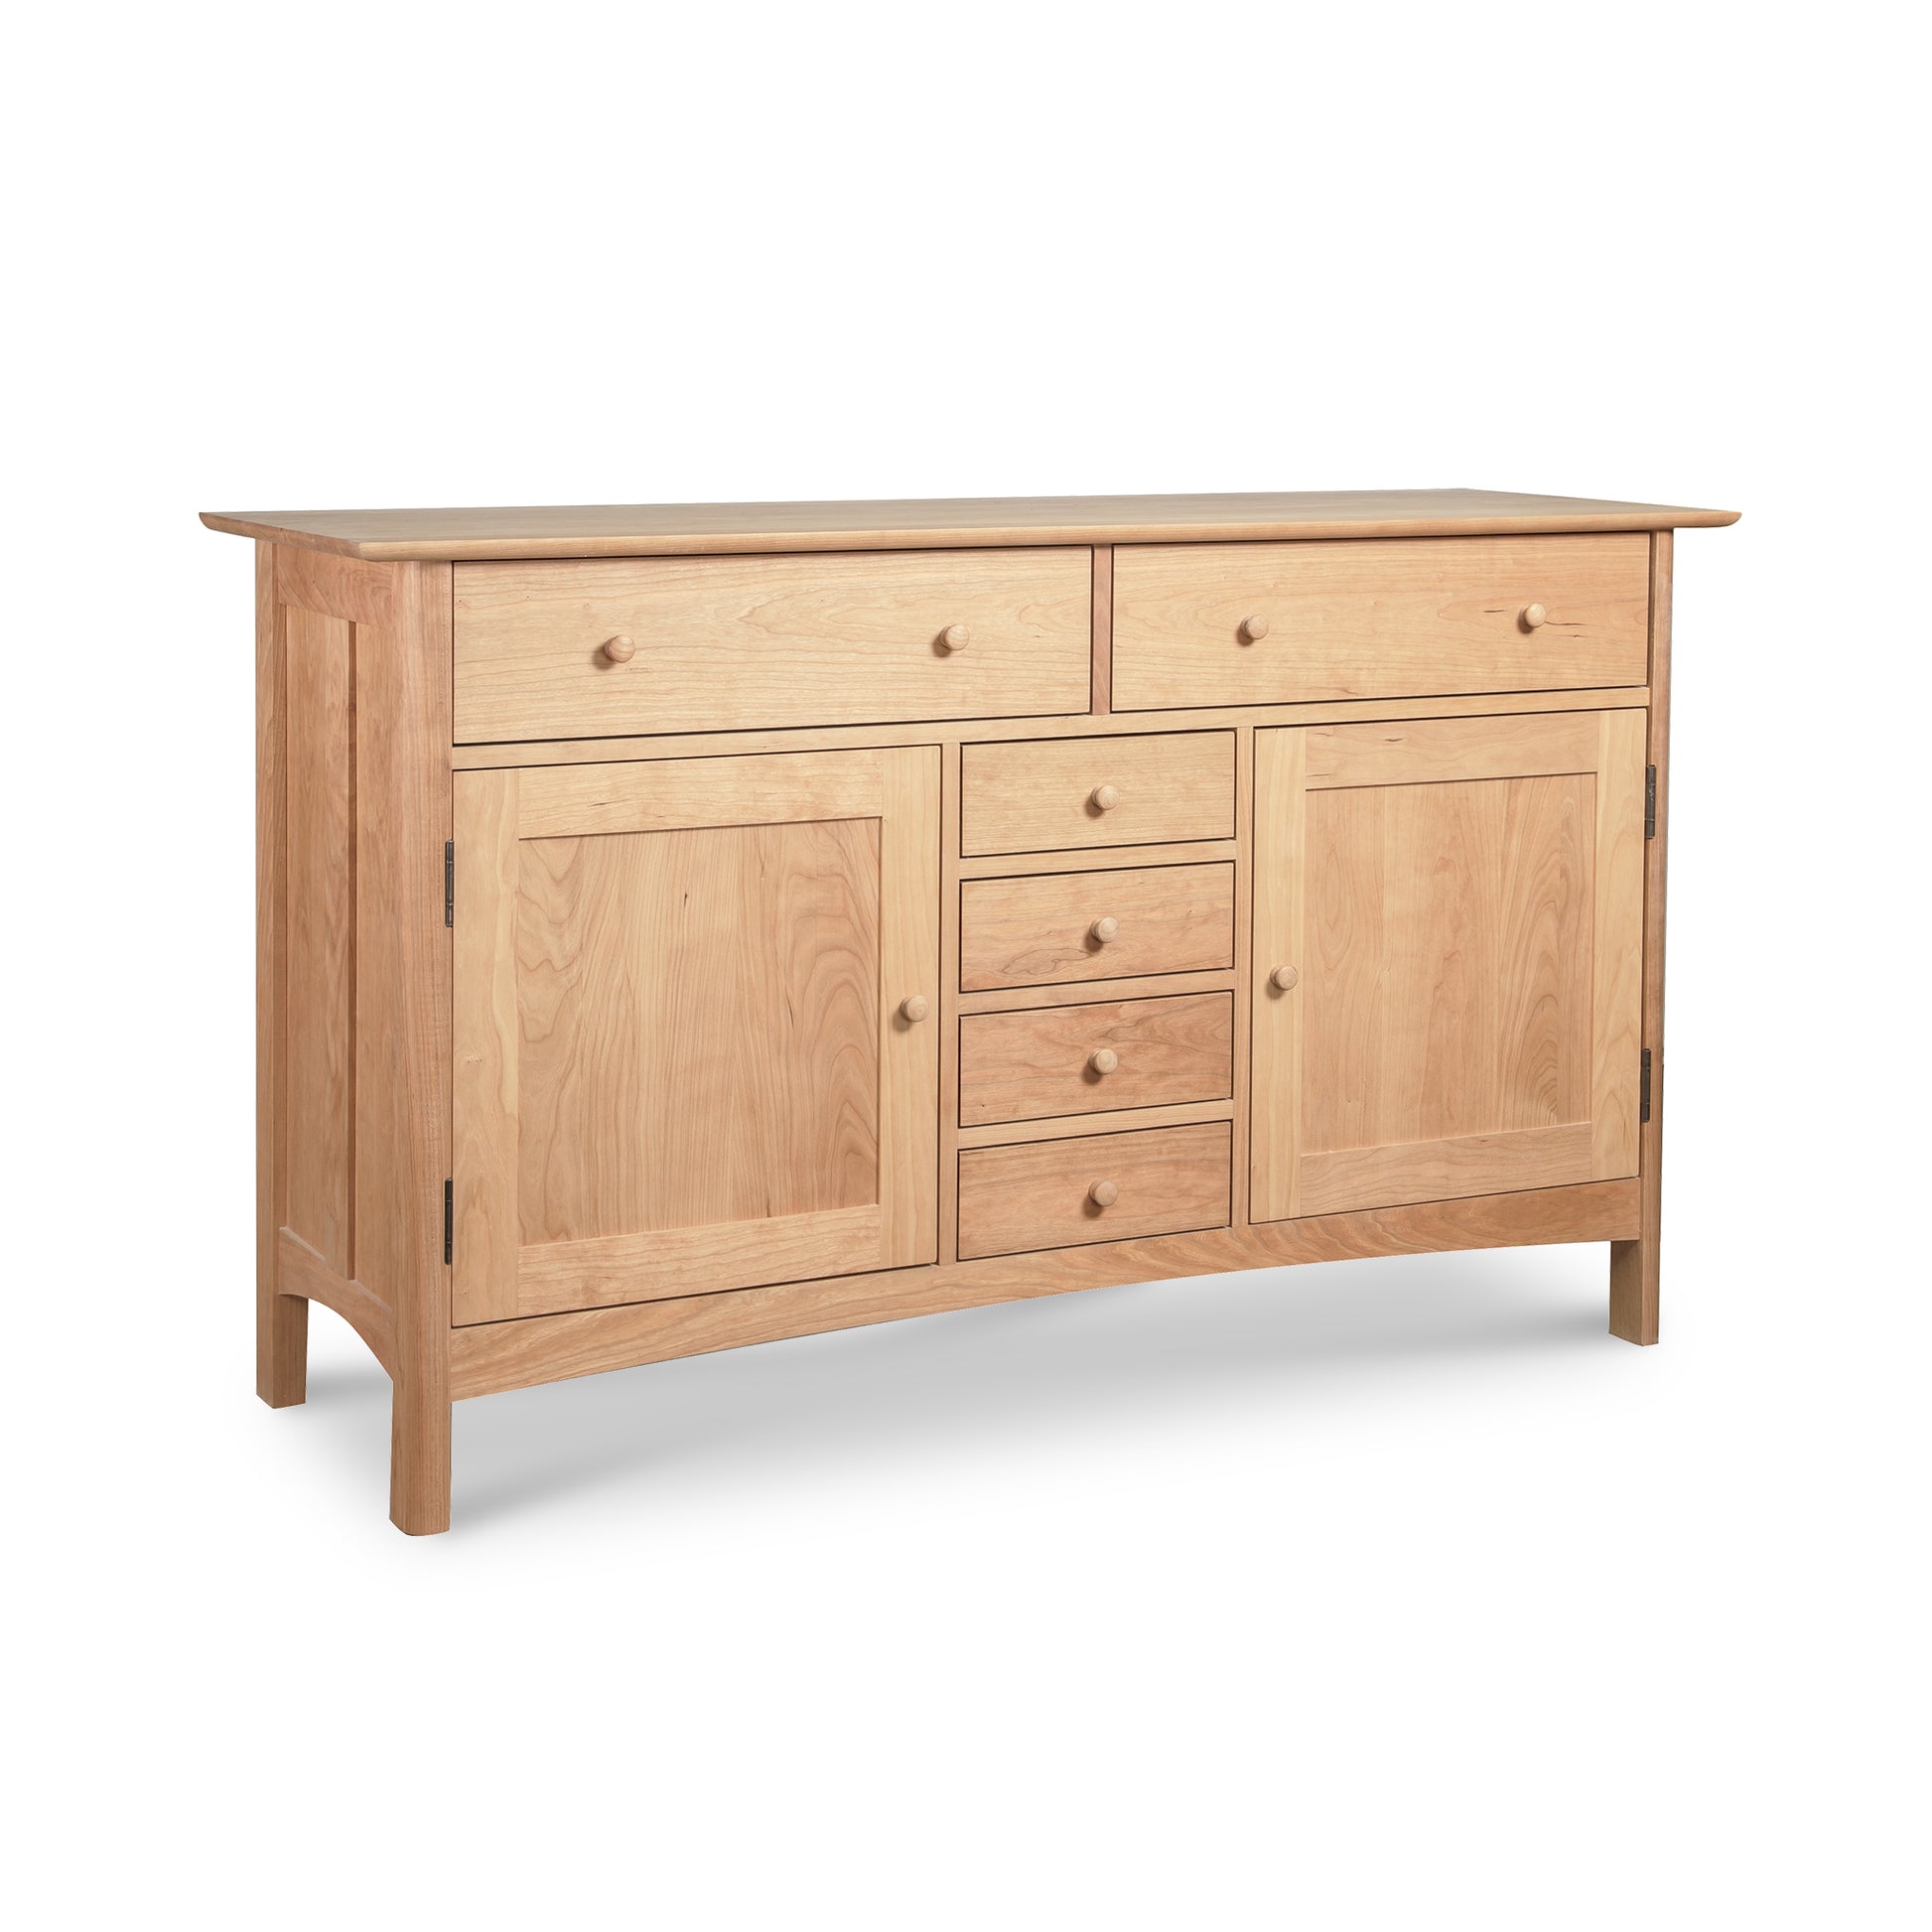 Vermont Furniture Designs Heartwood Shaker Sideboard with two doors and six drawers, crafted from solid hardwoods, displayed on a white background.